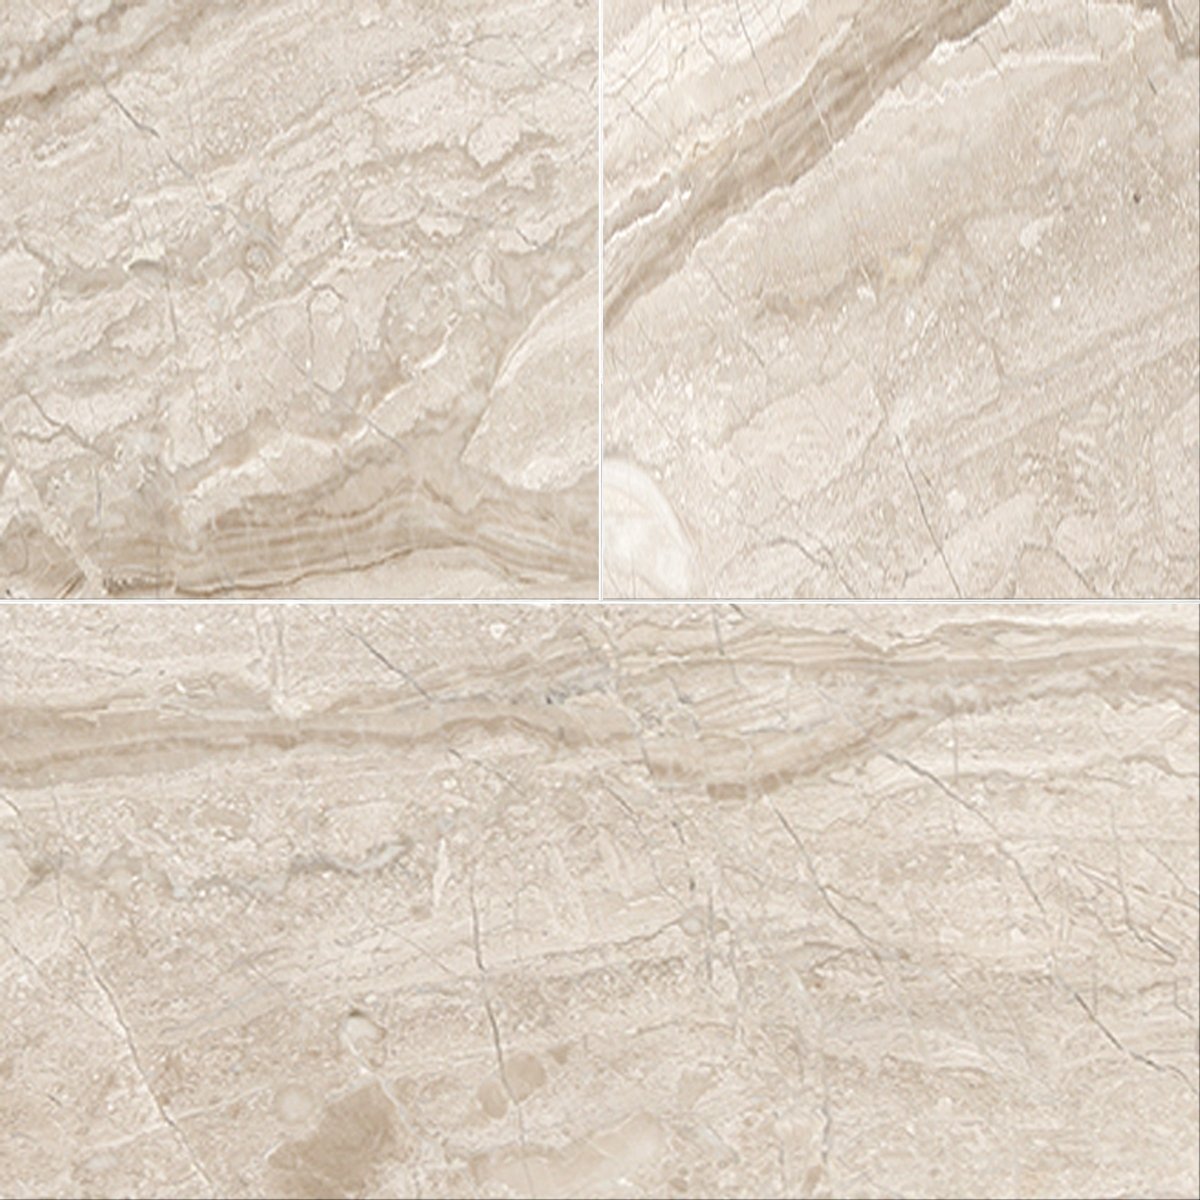 Diano Royale Honed Marble Field Tile 12''x24''x1/2''